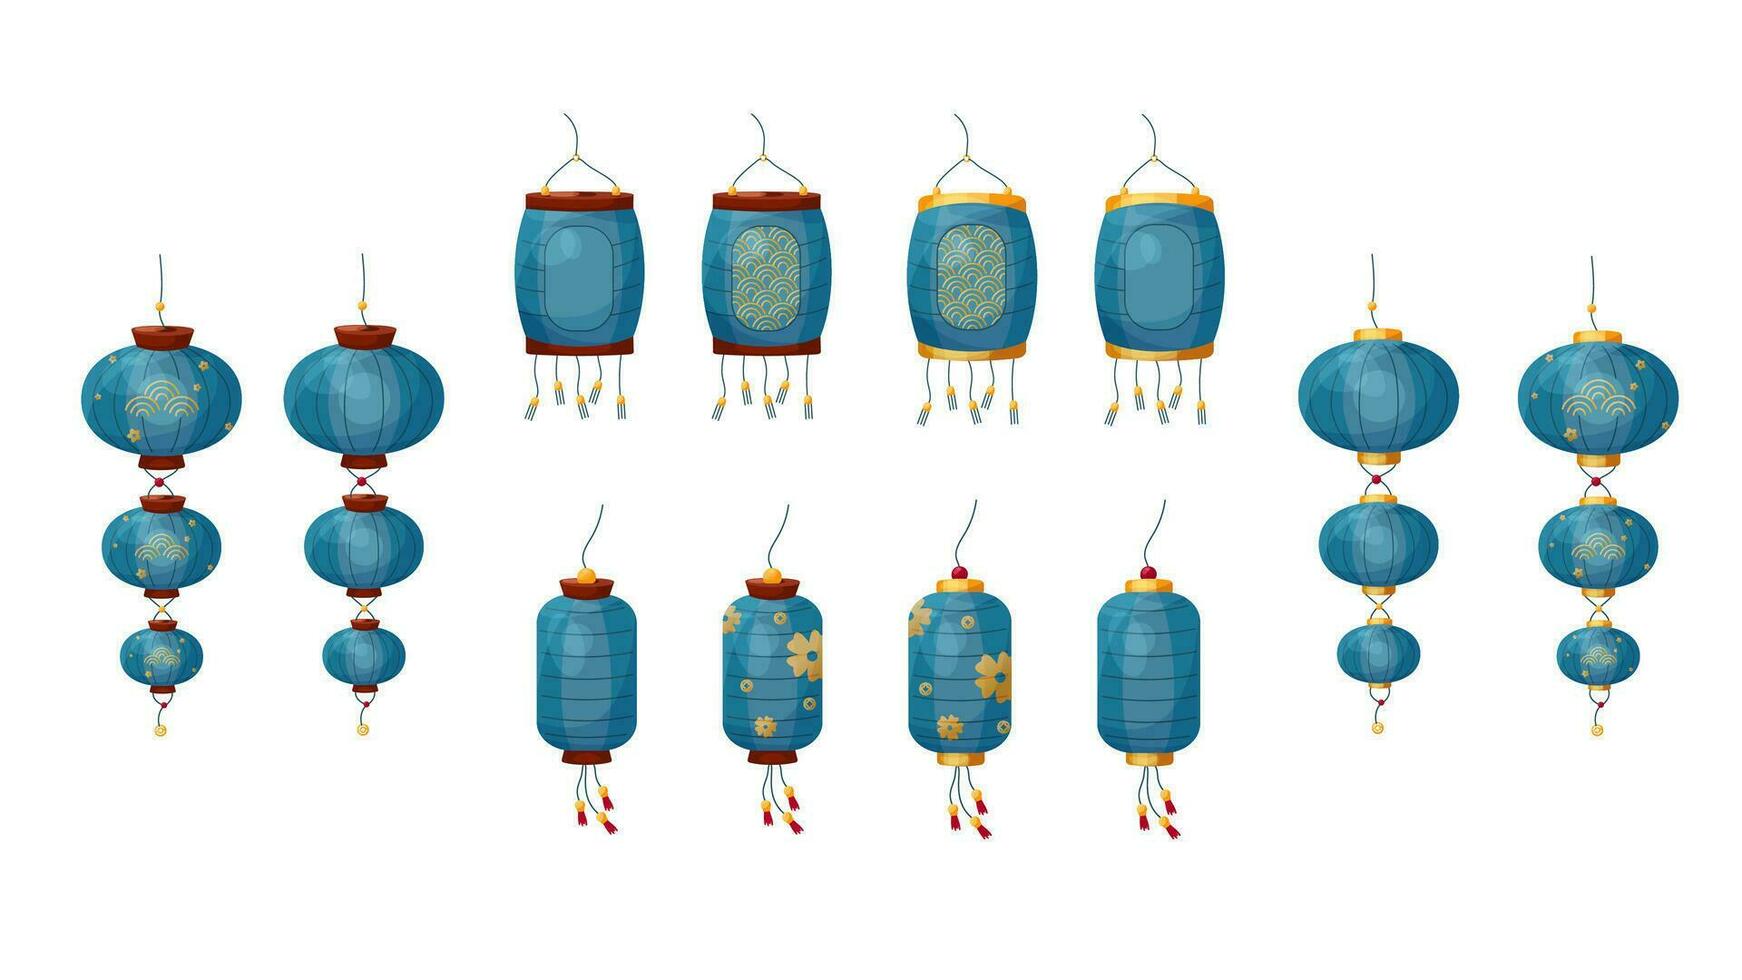 Vector cartoon style set of blue Chinese lanterns with and without ornaments. Element of Chinese New Year, Mid-Autumn Festival and Lantern festival. Collection for compositions and cards